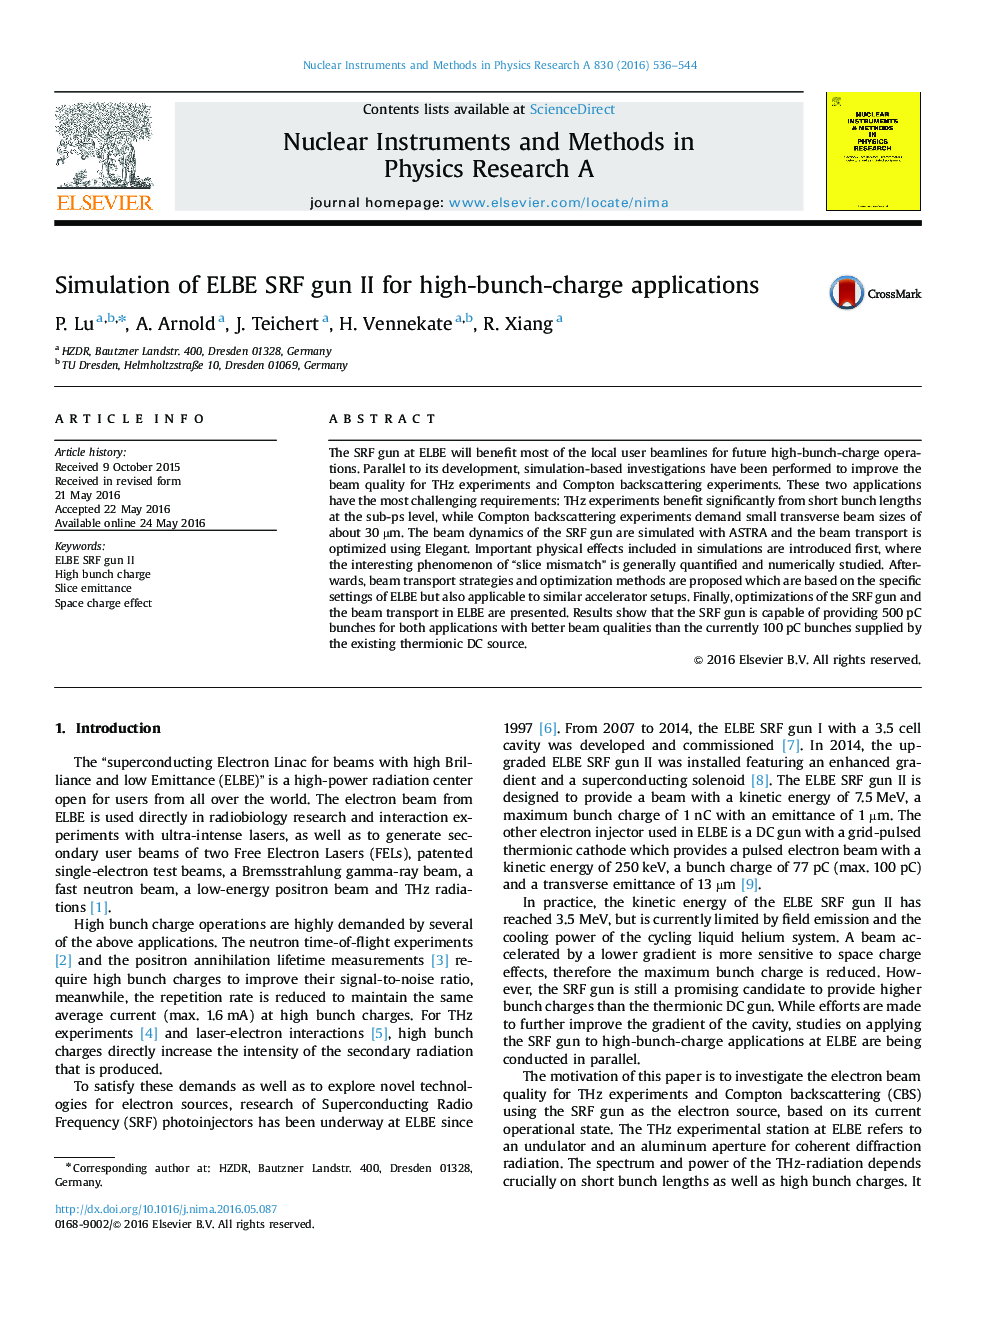 Simulation of ELBE SRF gun II for high-bunch-charge applications